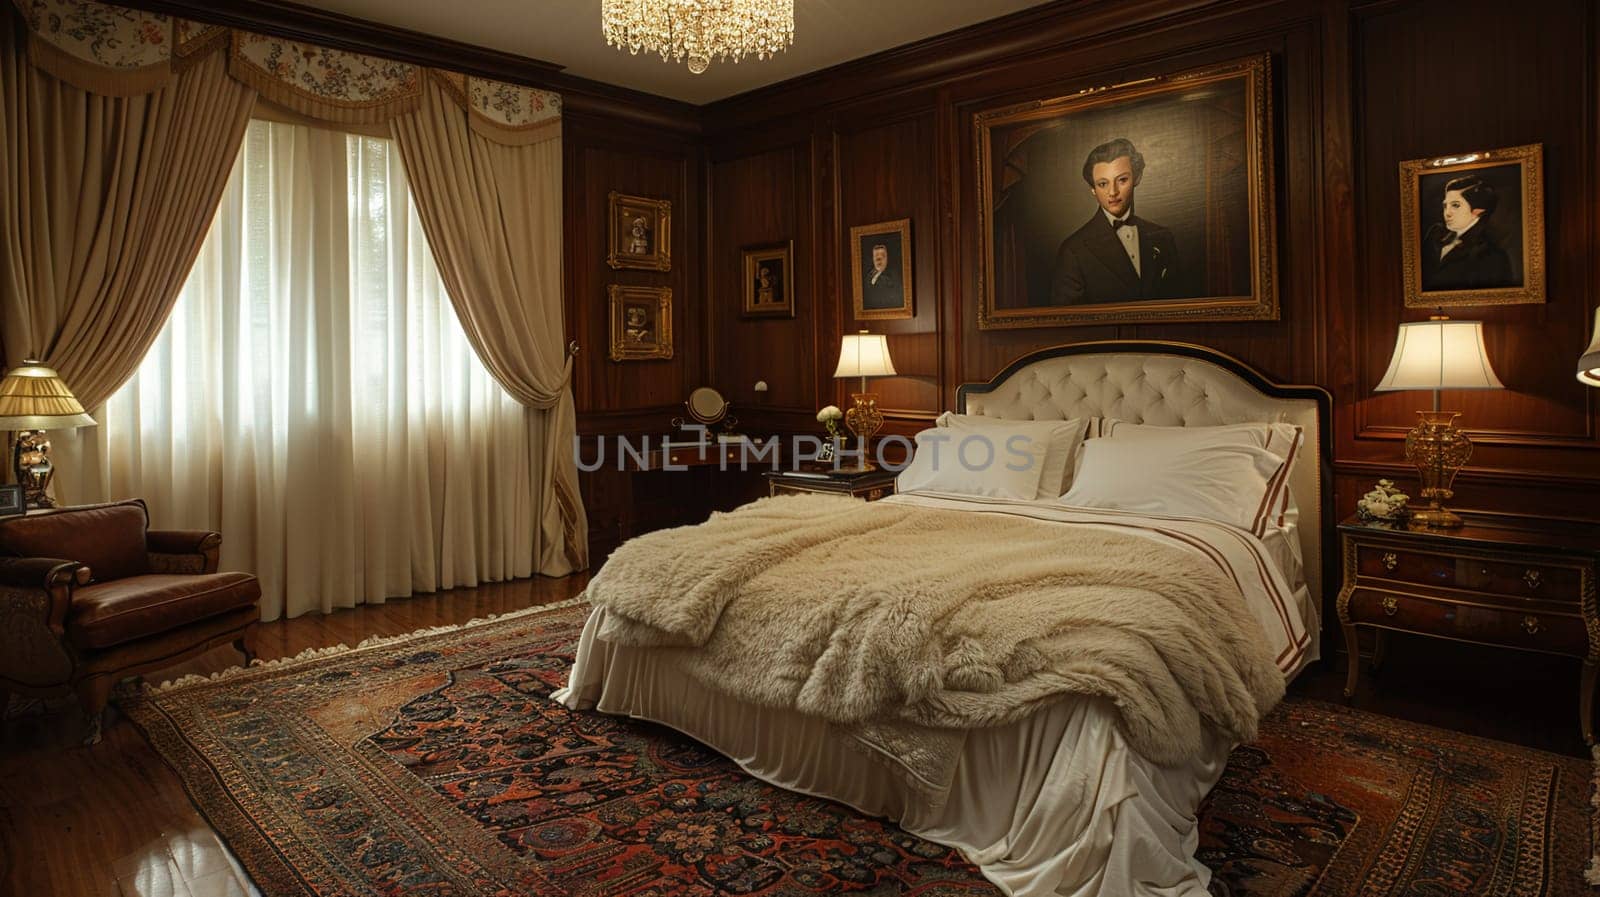 Old Hollywood glamour bedroom with satin drapes and vintage portraits